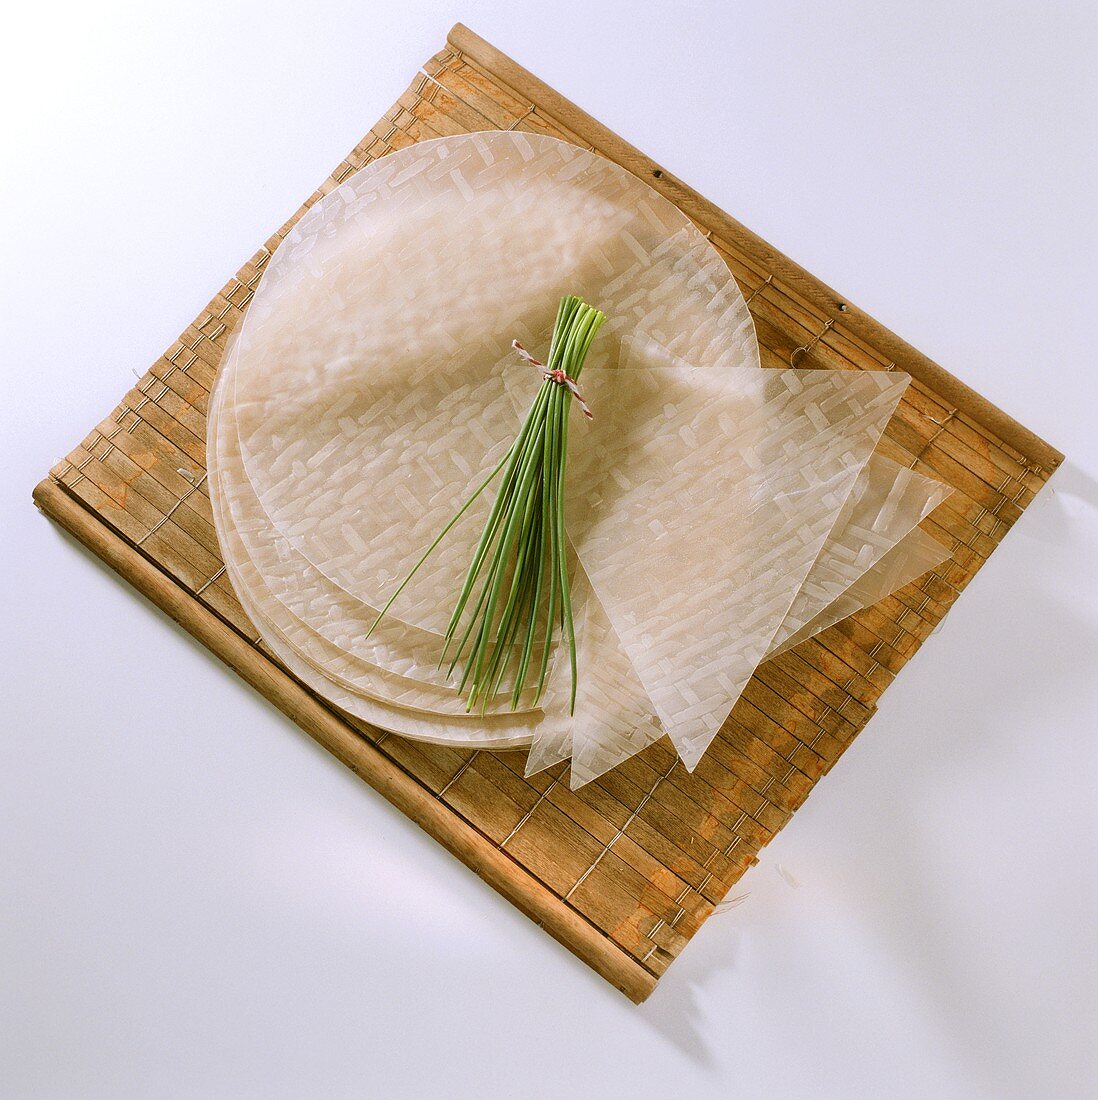 Round & triangular rice paper, with a bunch of chives